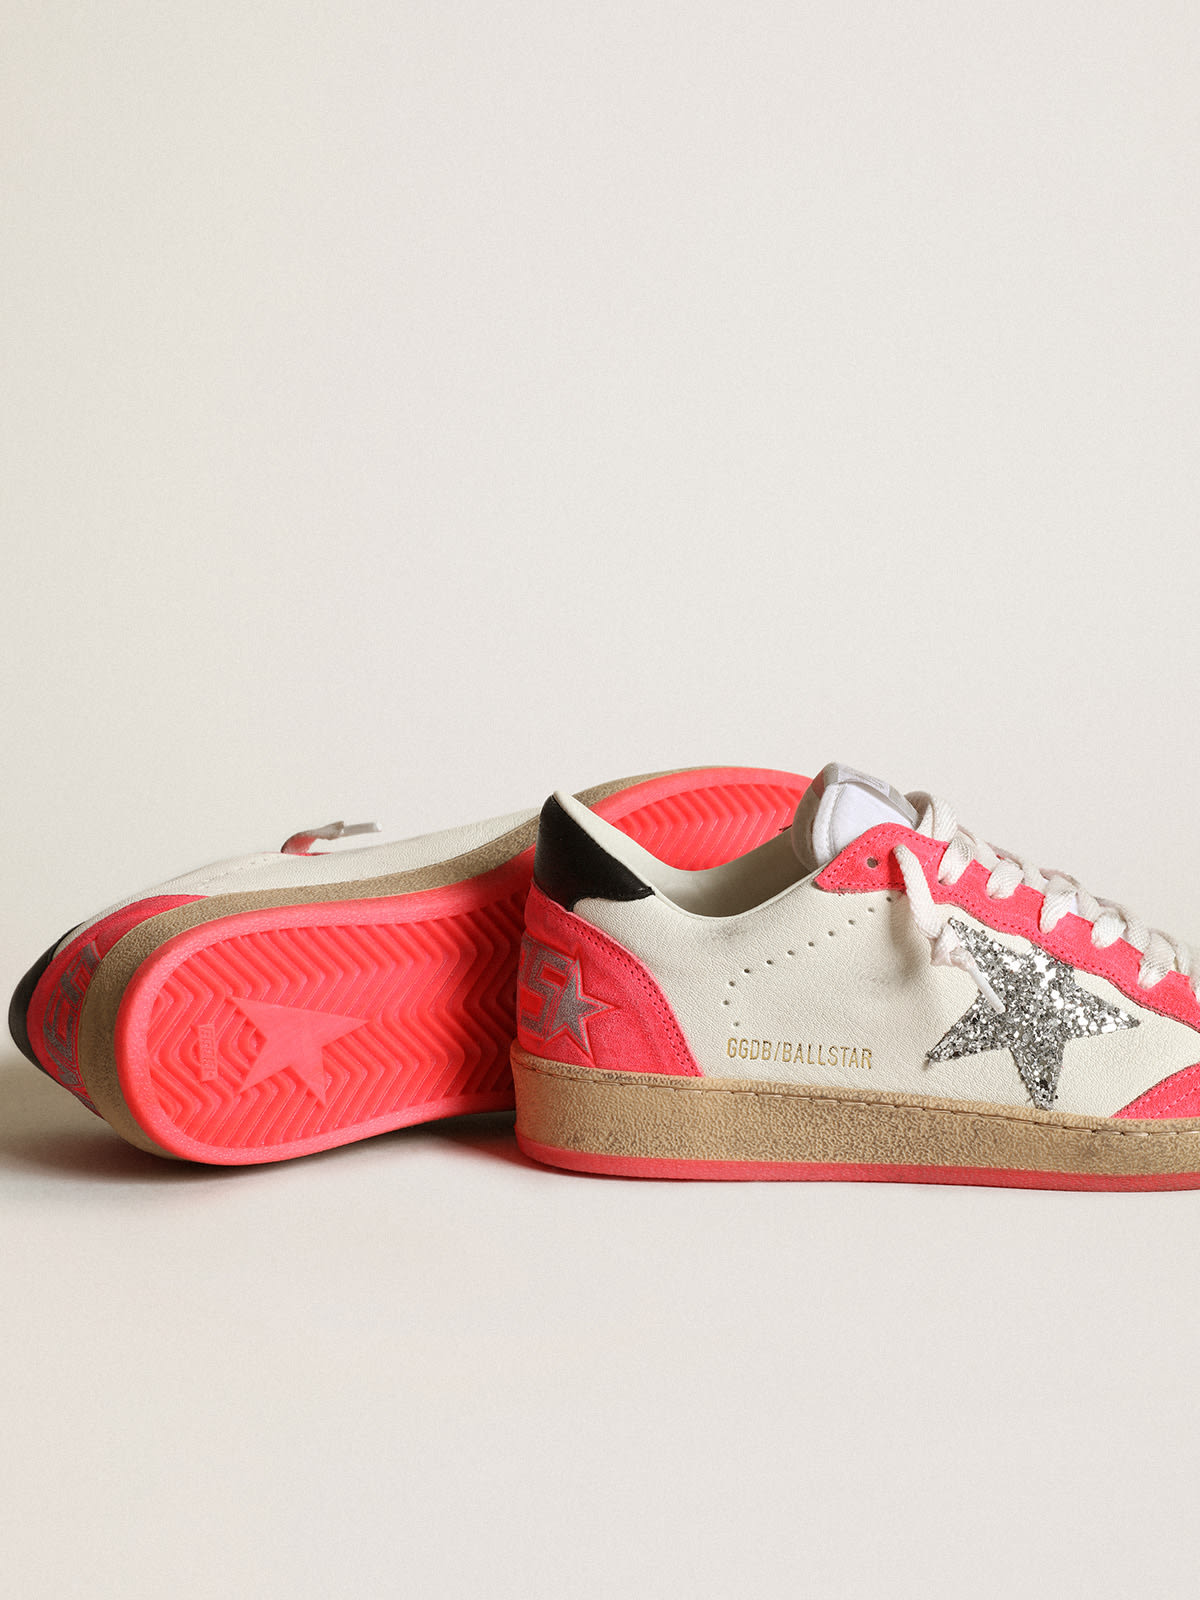 Golden Goose - Ball Star sneakers in white nappa leather with silver glitter star and fluorescent lobster-colored suede inserts in 